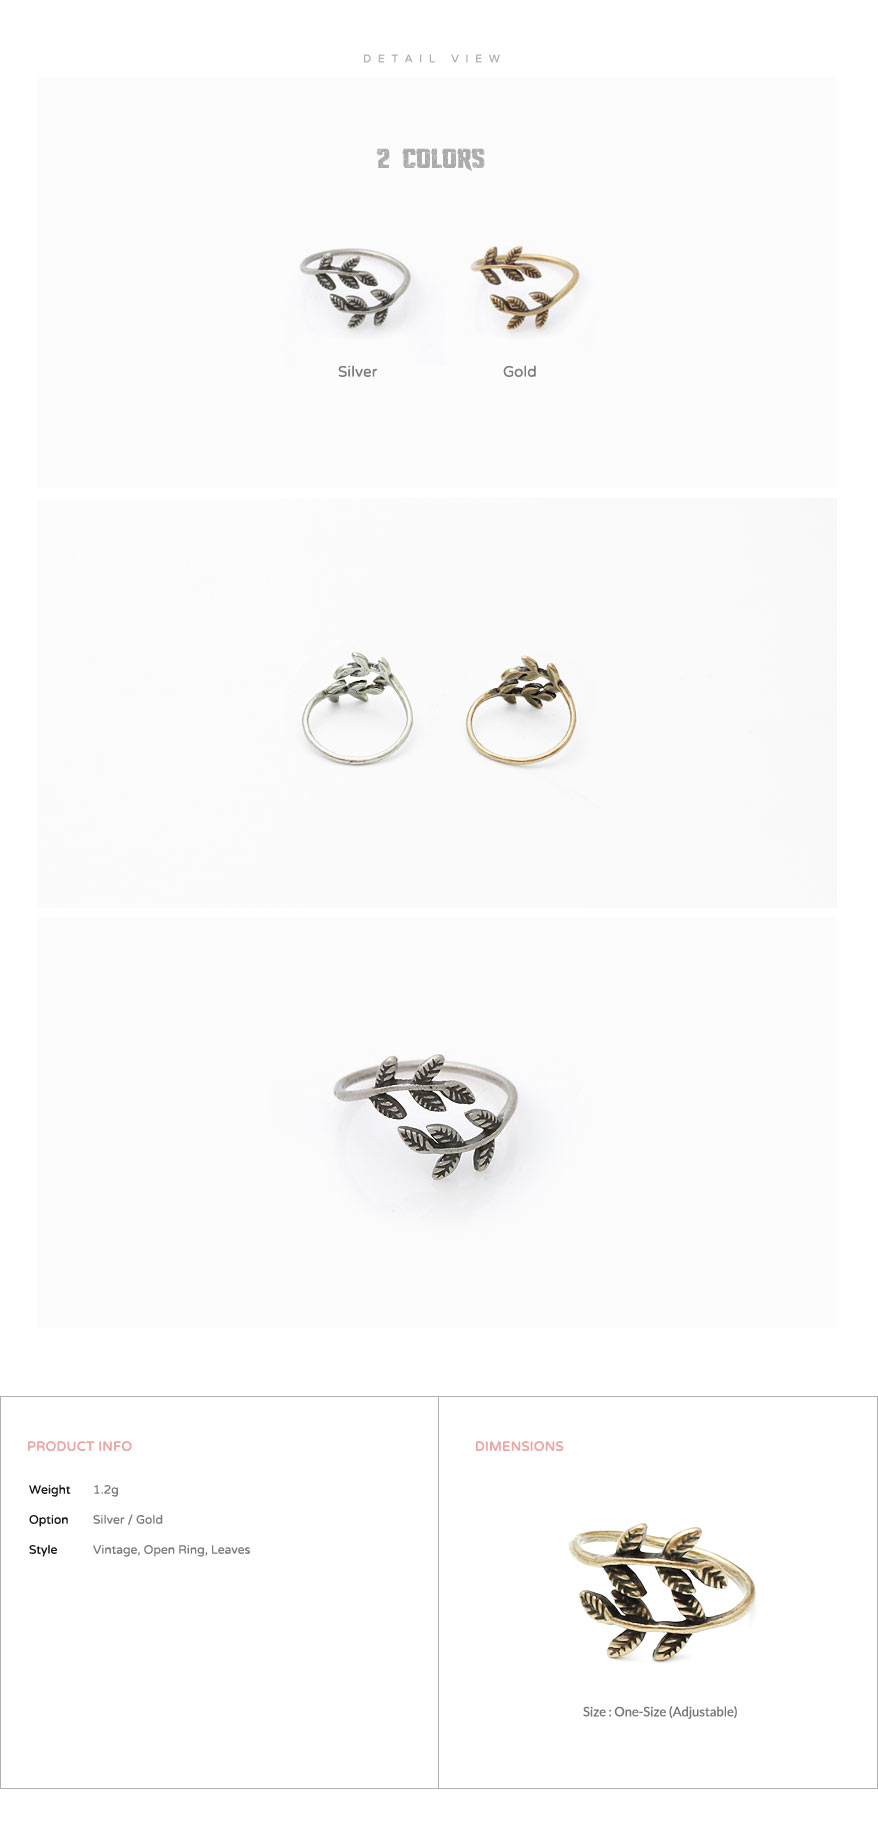 accessories_korean_asian_style_jewelry_open_ring_vintage_leaves_trendy_5